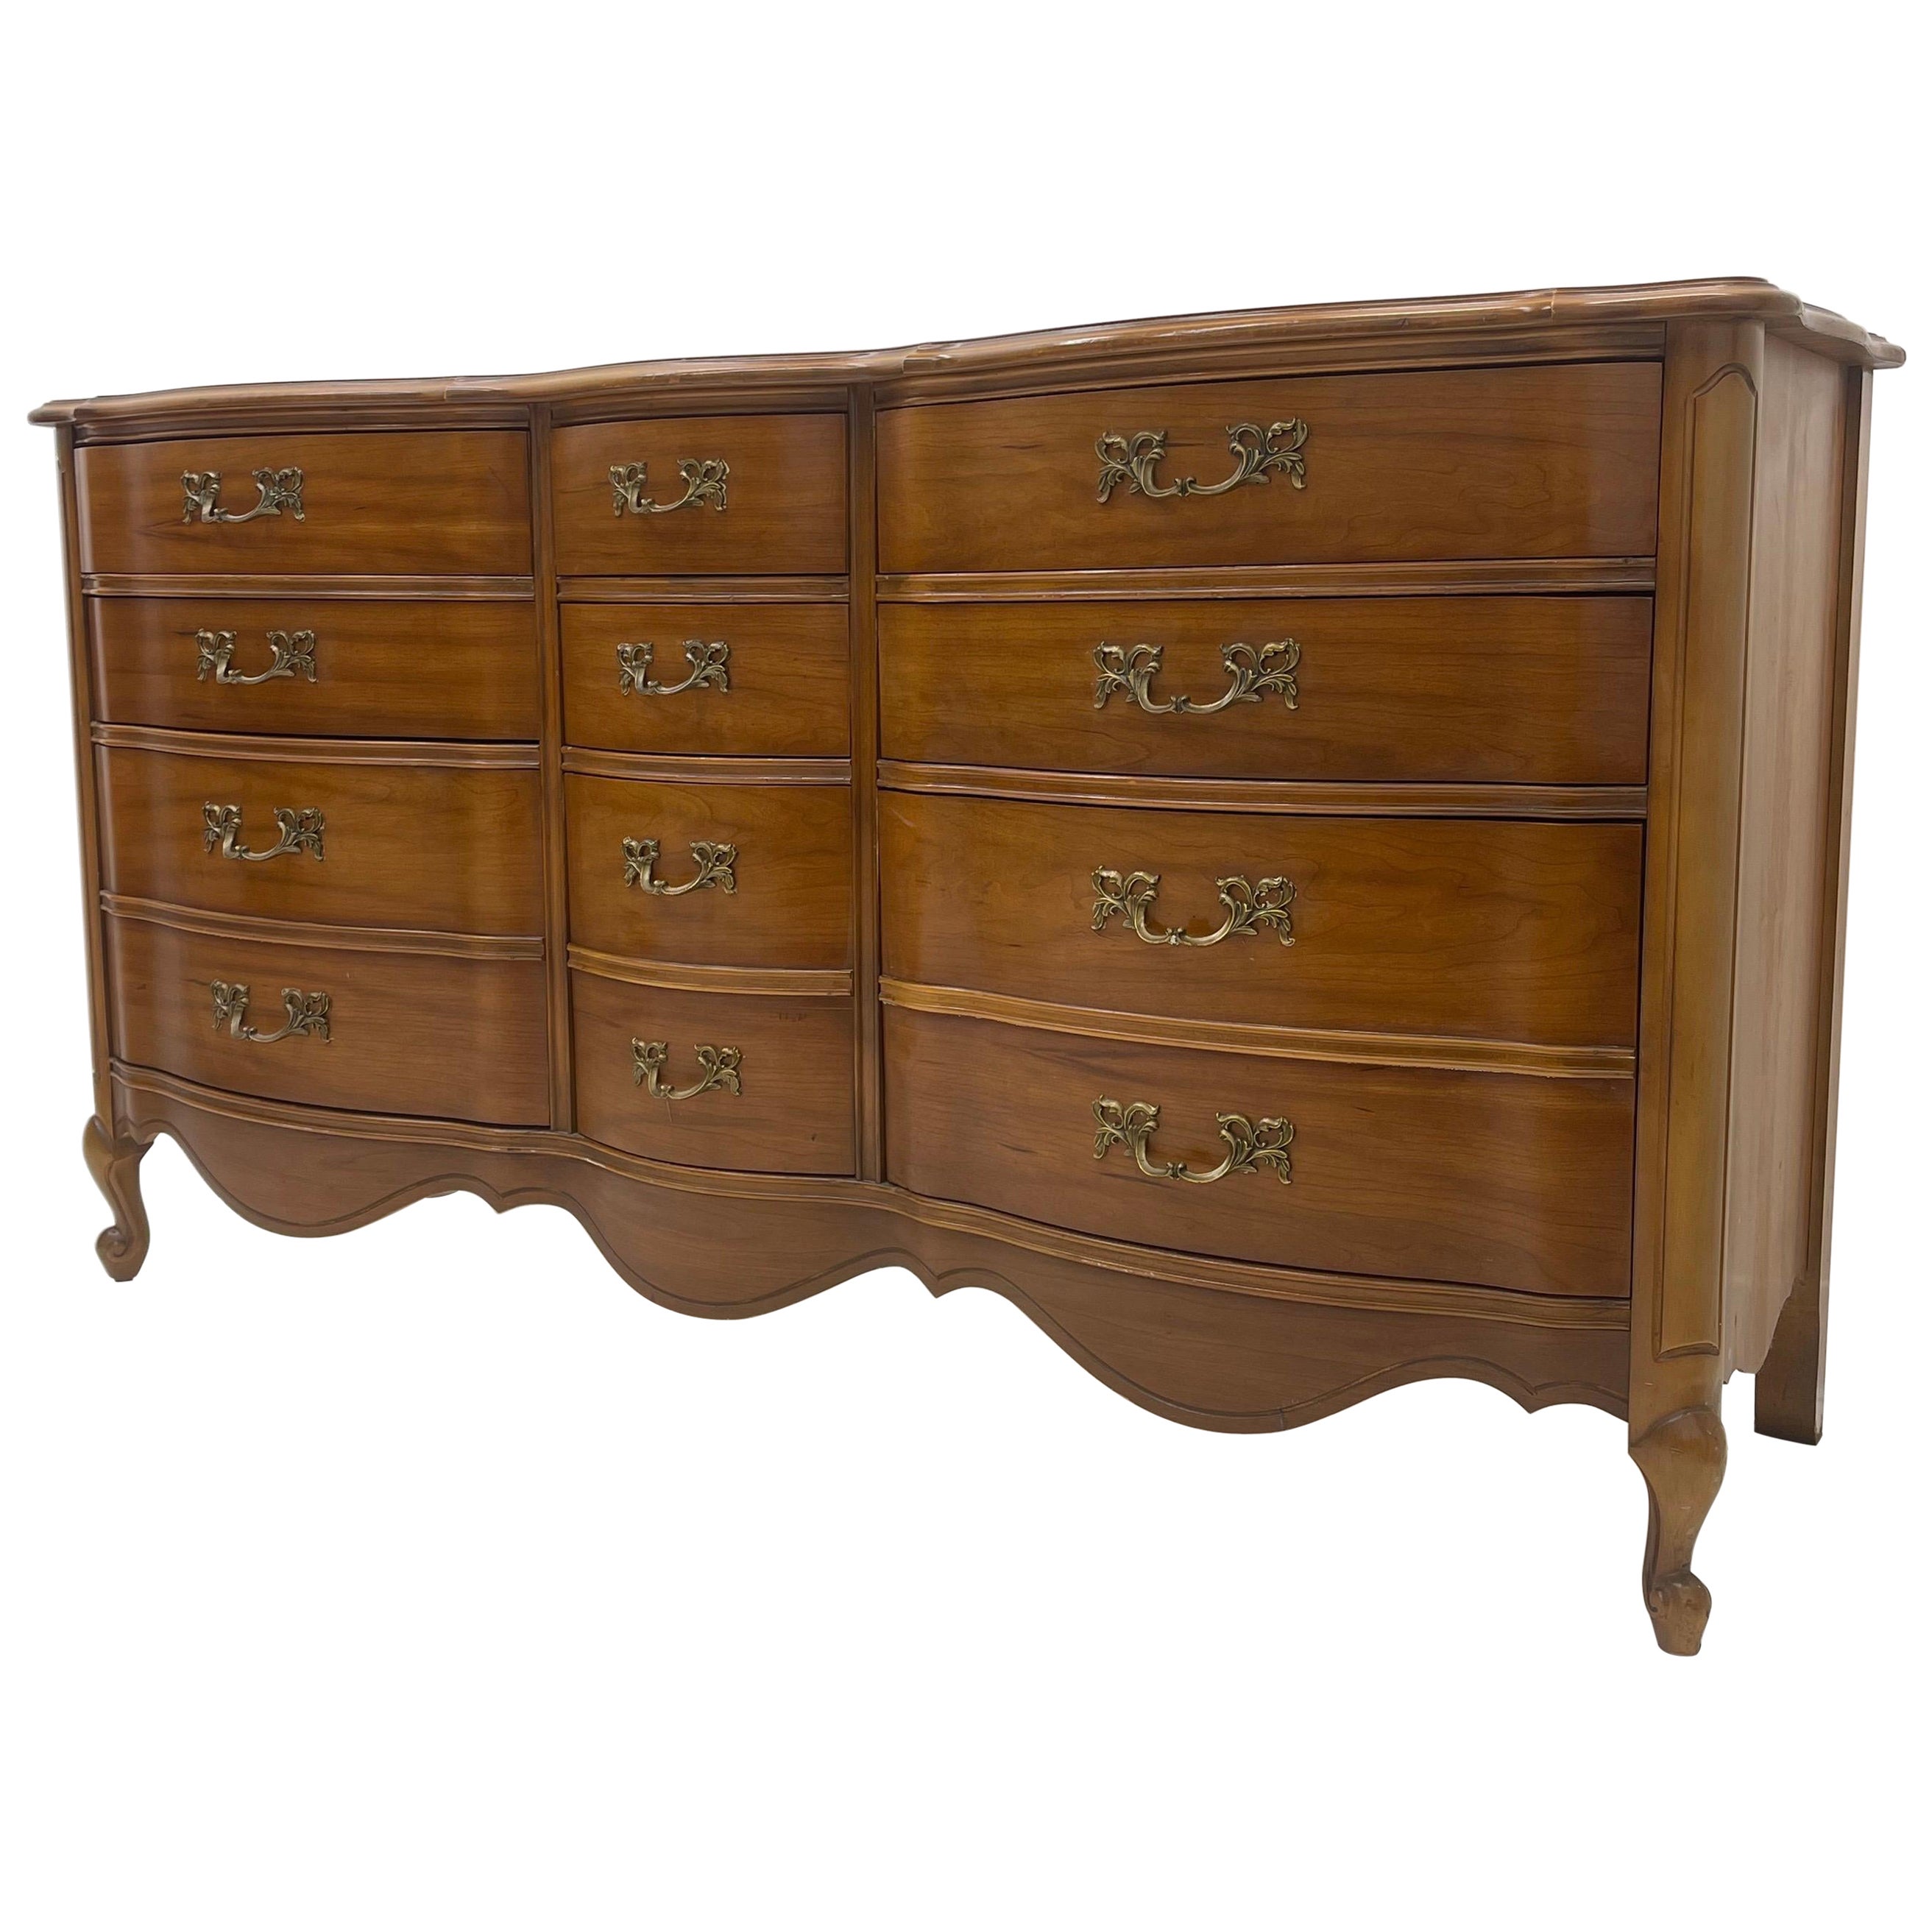 Vintage French Provincial Dresser or Credenza with Dovetailed Drawers